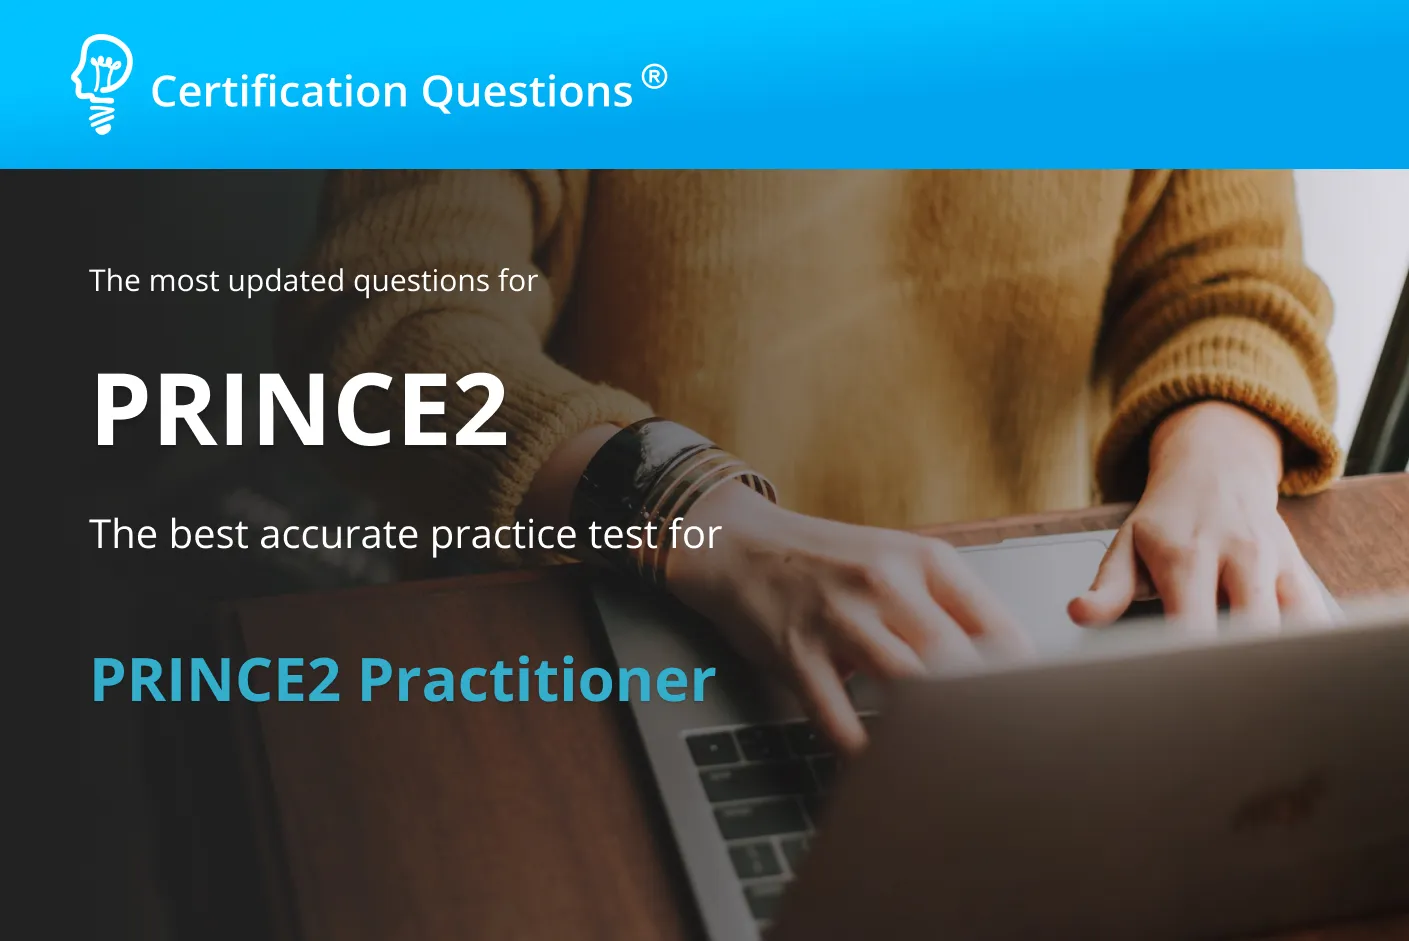 This guide is related to prince2 practitioner practice exams